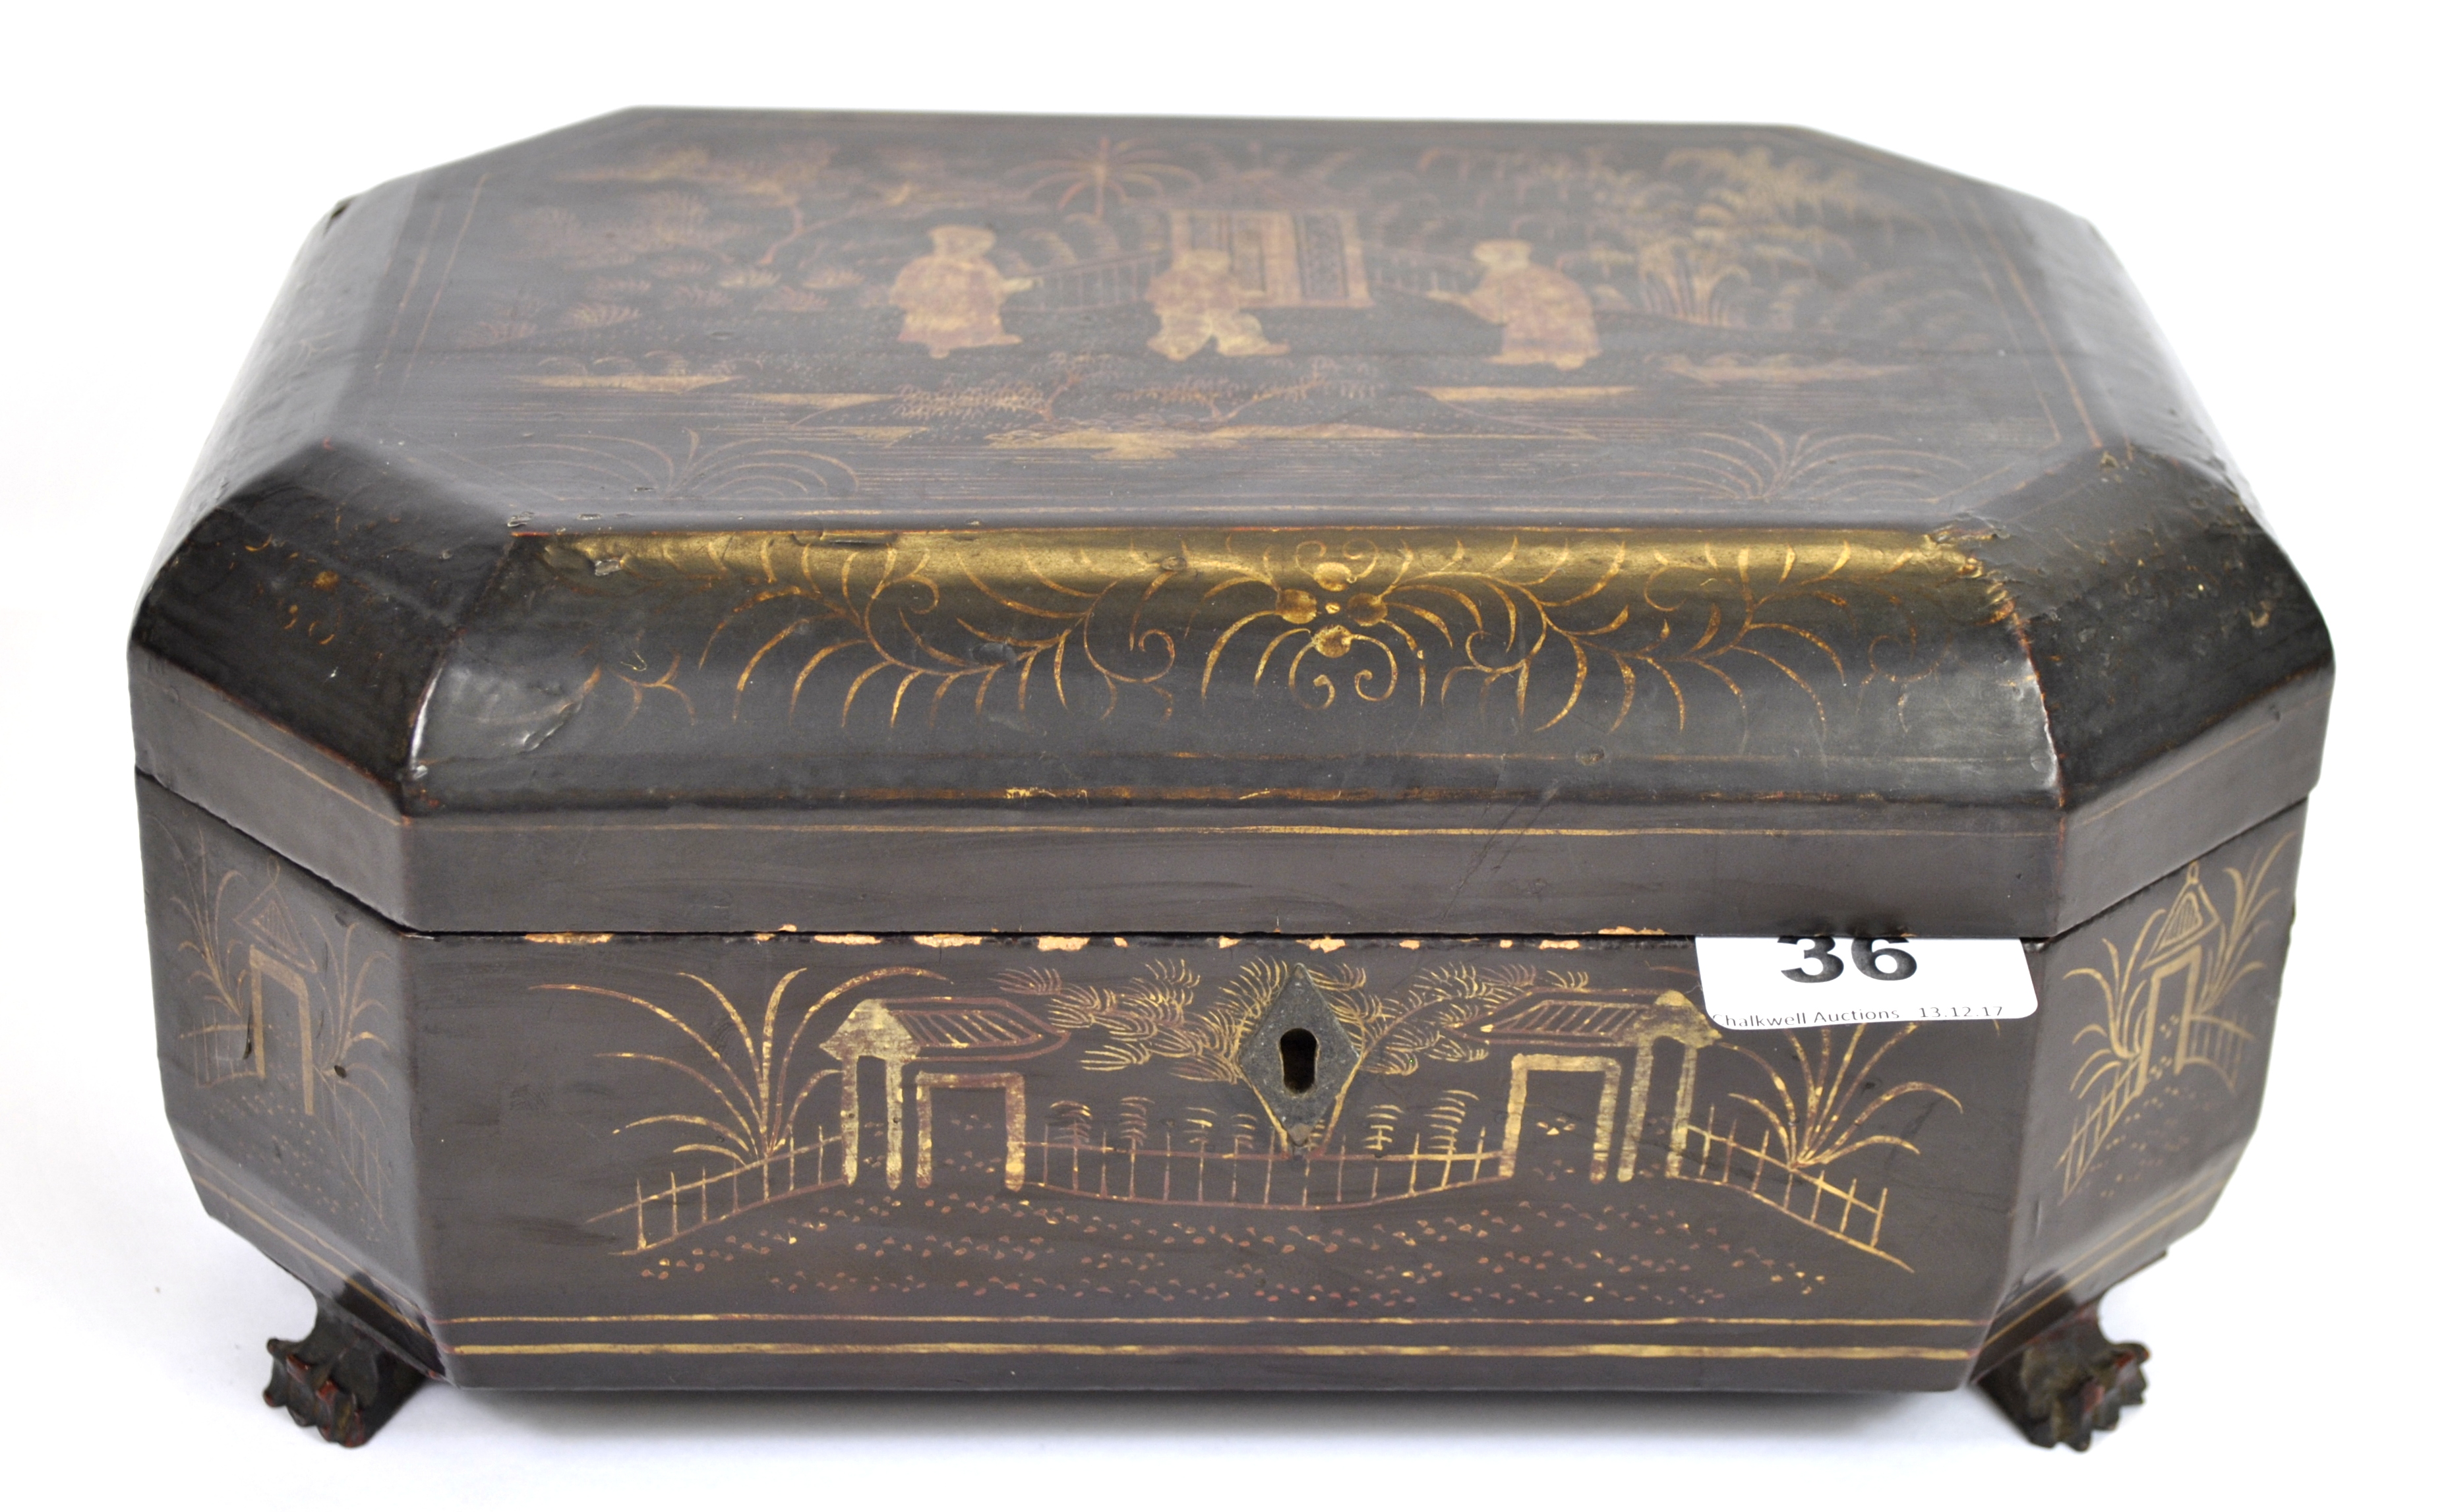 A 19th century Chinese fitted lacquered work box, 27 x 19 x 12cm.